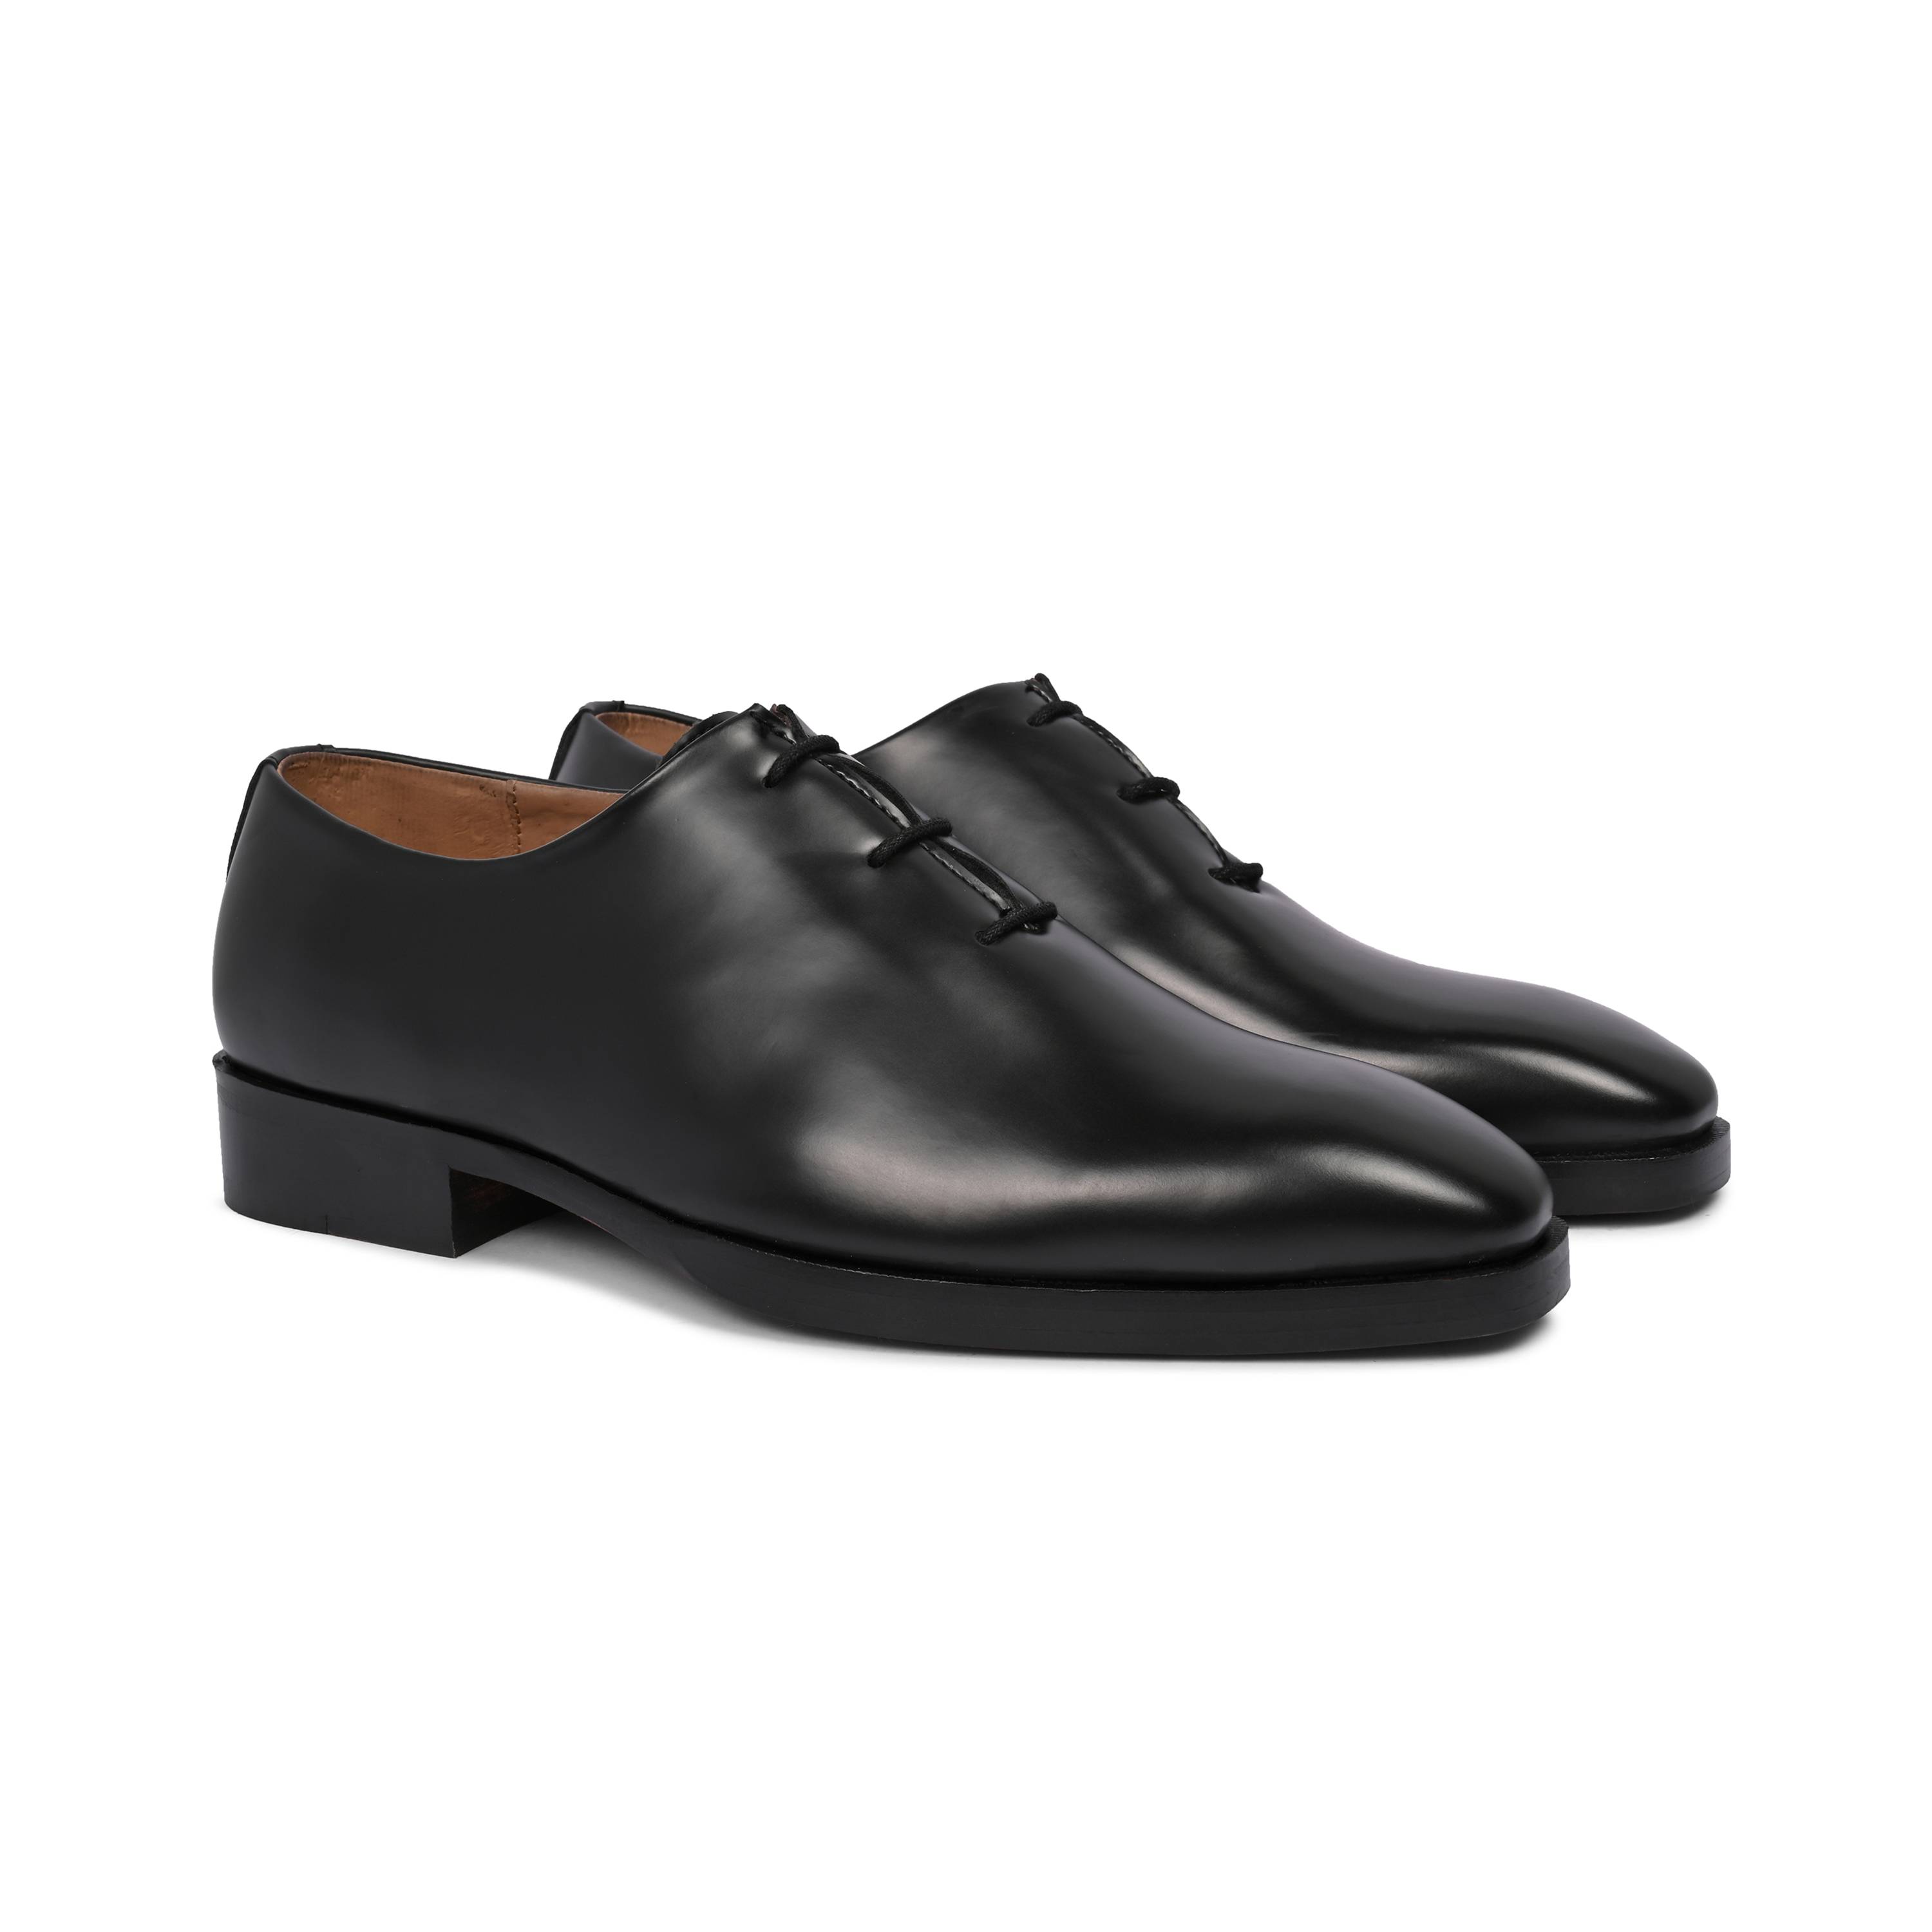 Quasar Quell Derby Formal Lace up Shoes